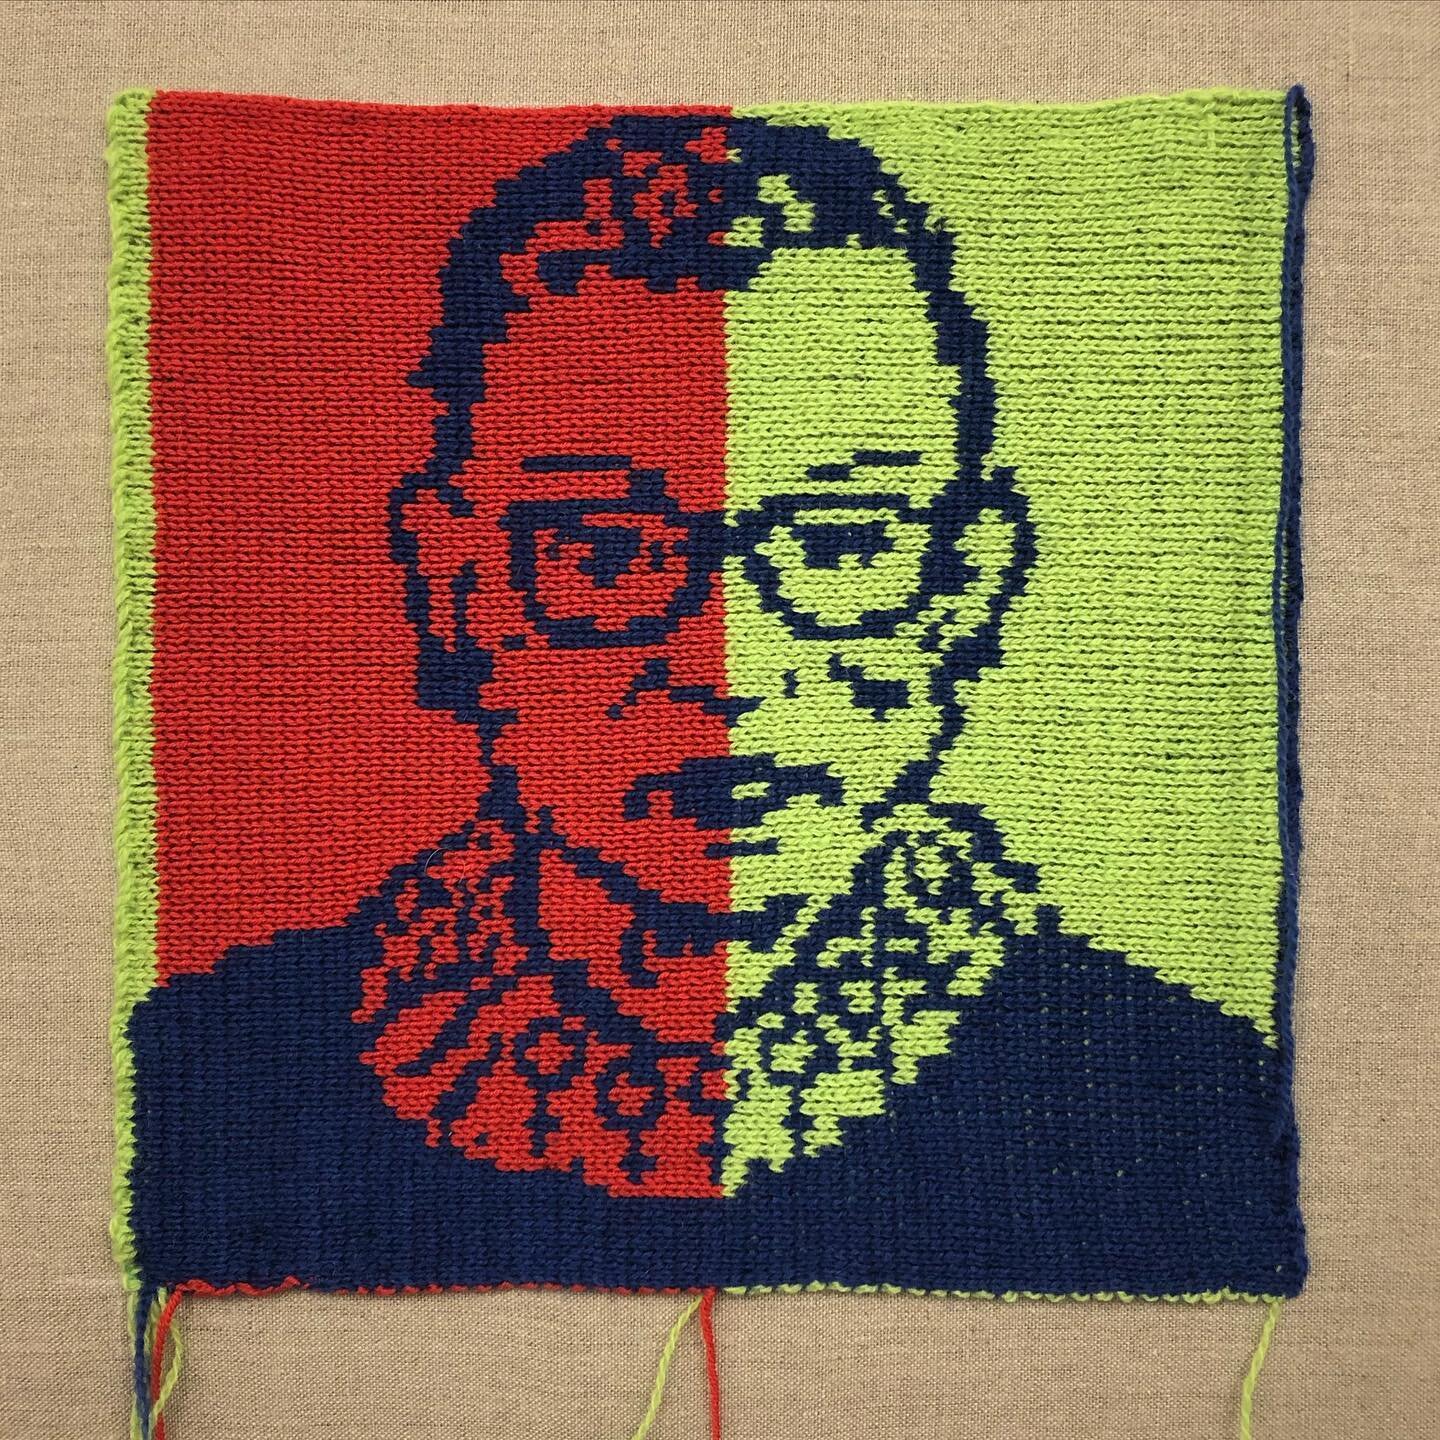 WWRBGD? Revisiting this piece today, with thoughts of Georgia on my mind and the weekend  ranting of a lunatic still ringing in my ears. What happens next!? The future is still unknitten. 
🧶
#nowknits #unknitten #rbg #knitting